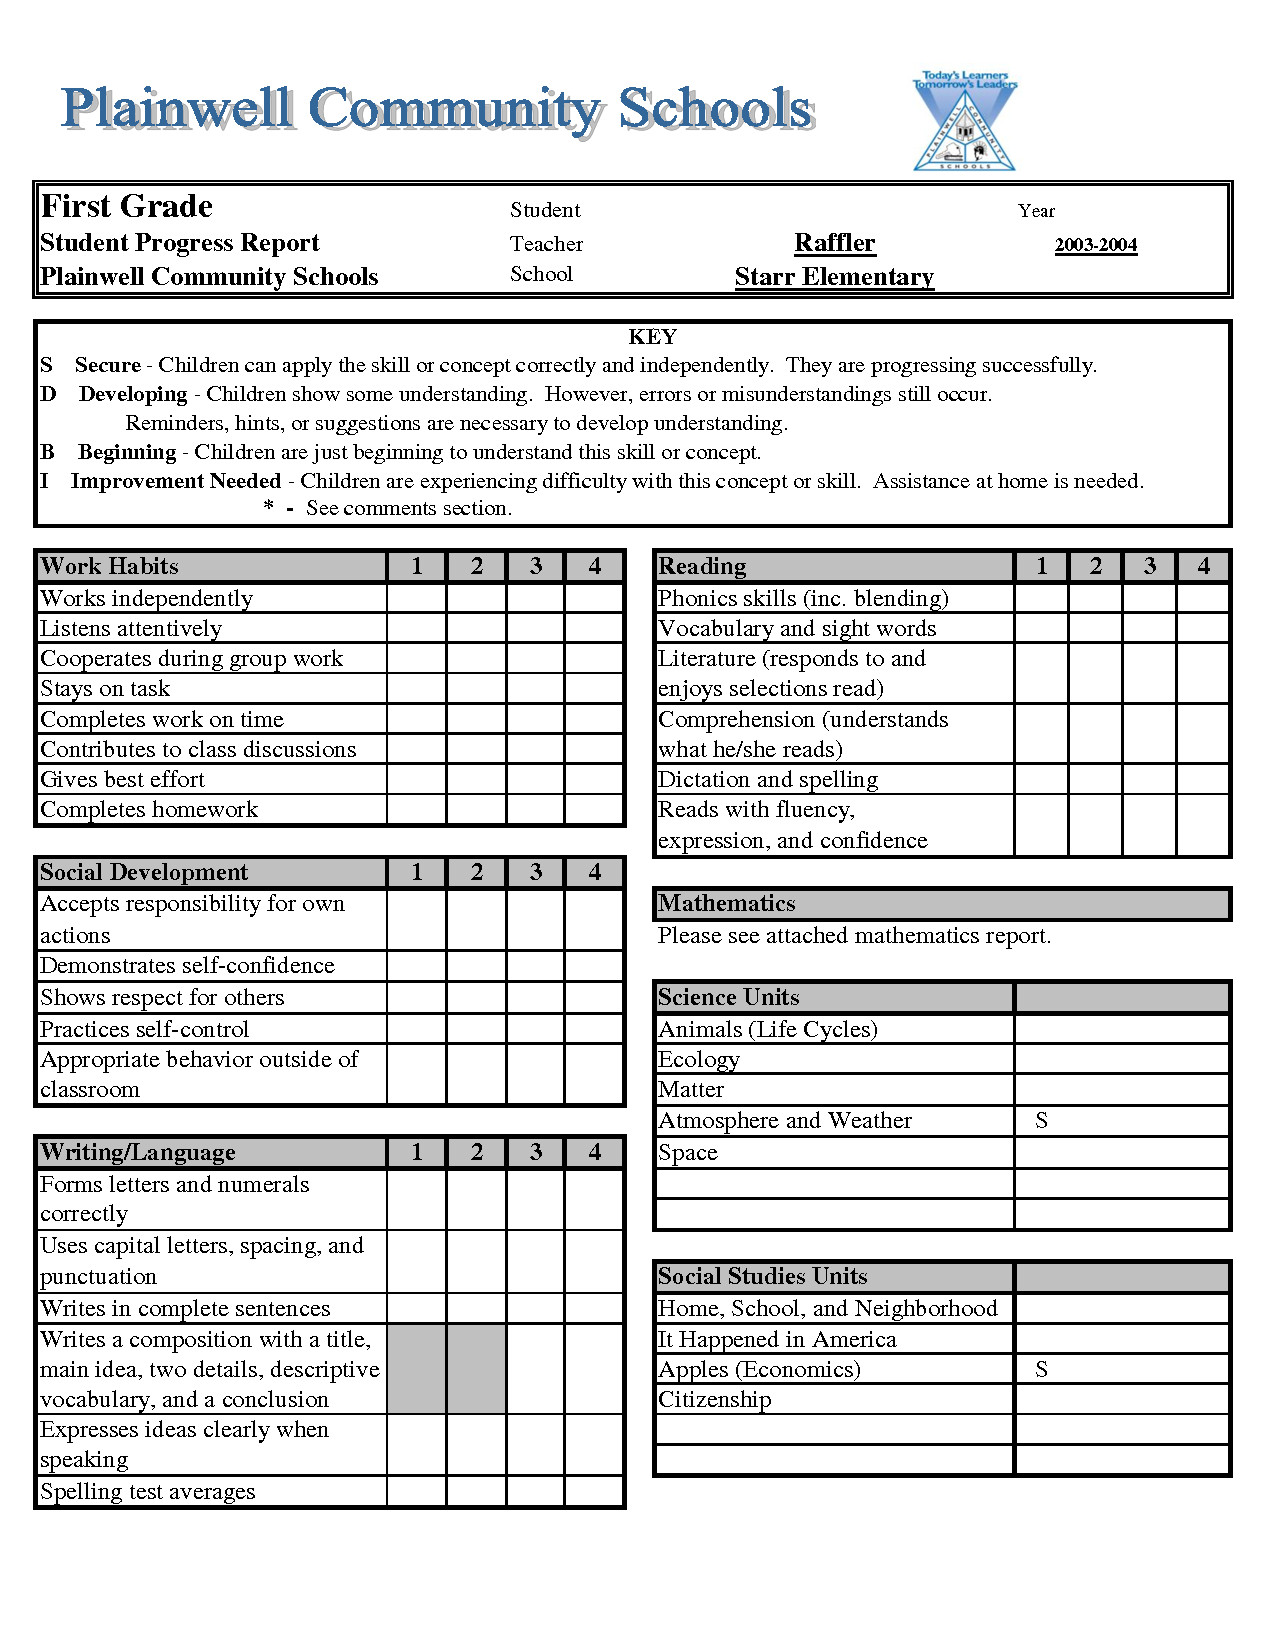 Report Card Template Excel xls Download legal documents